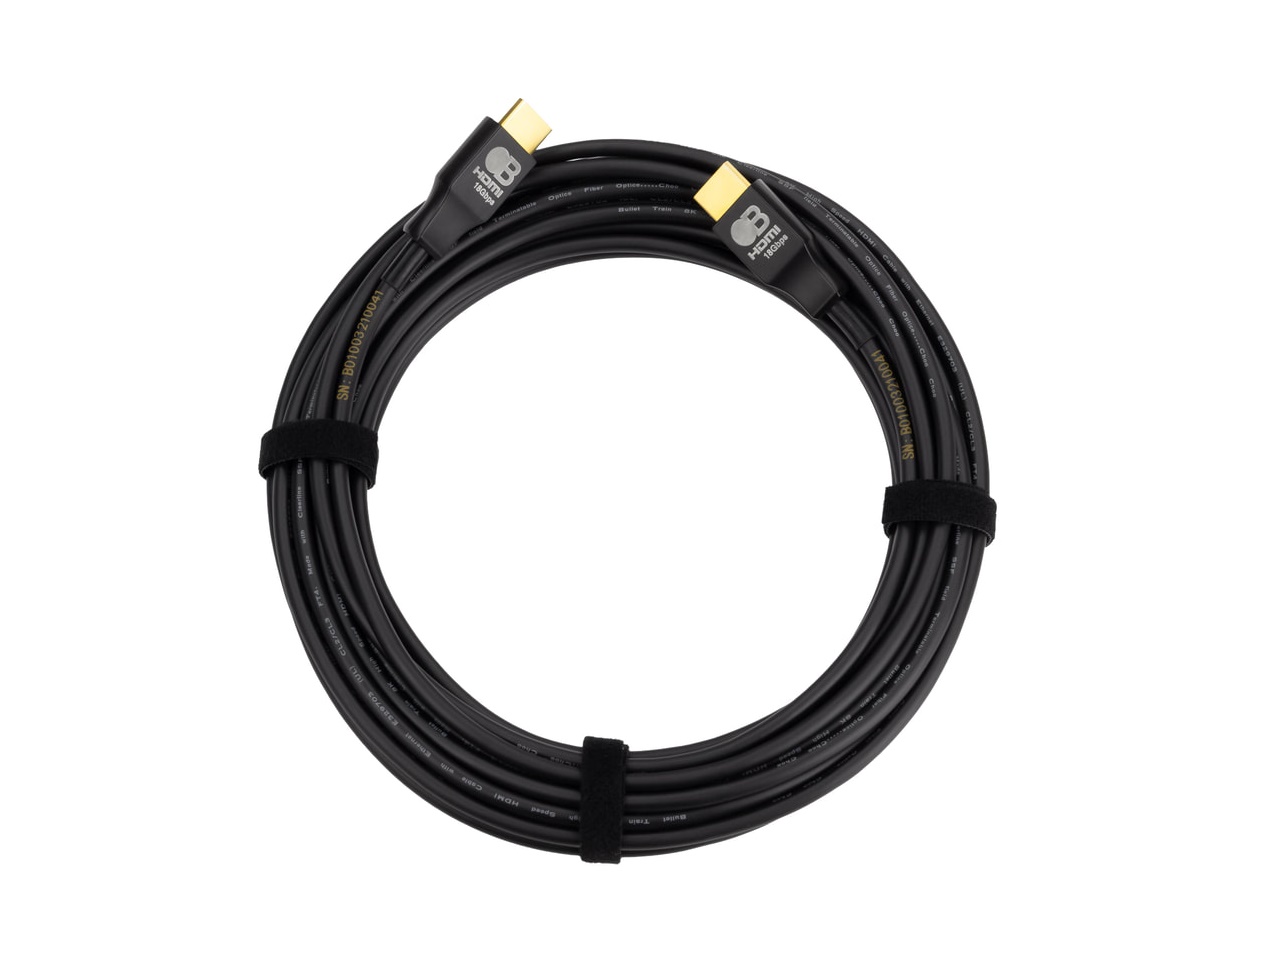 AC-BTSSF-5KUHD-40 40m/131.2ft Premium Active Optical HDMI Cable by AVPro Edge